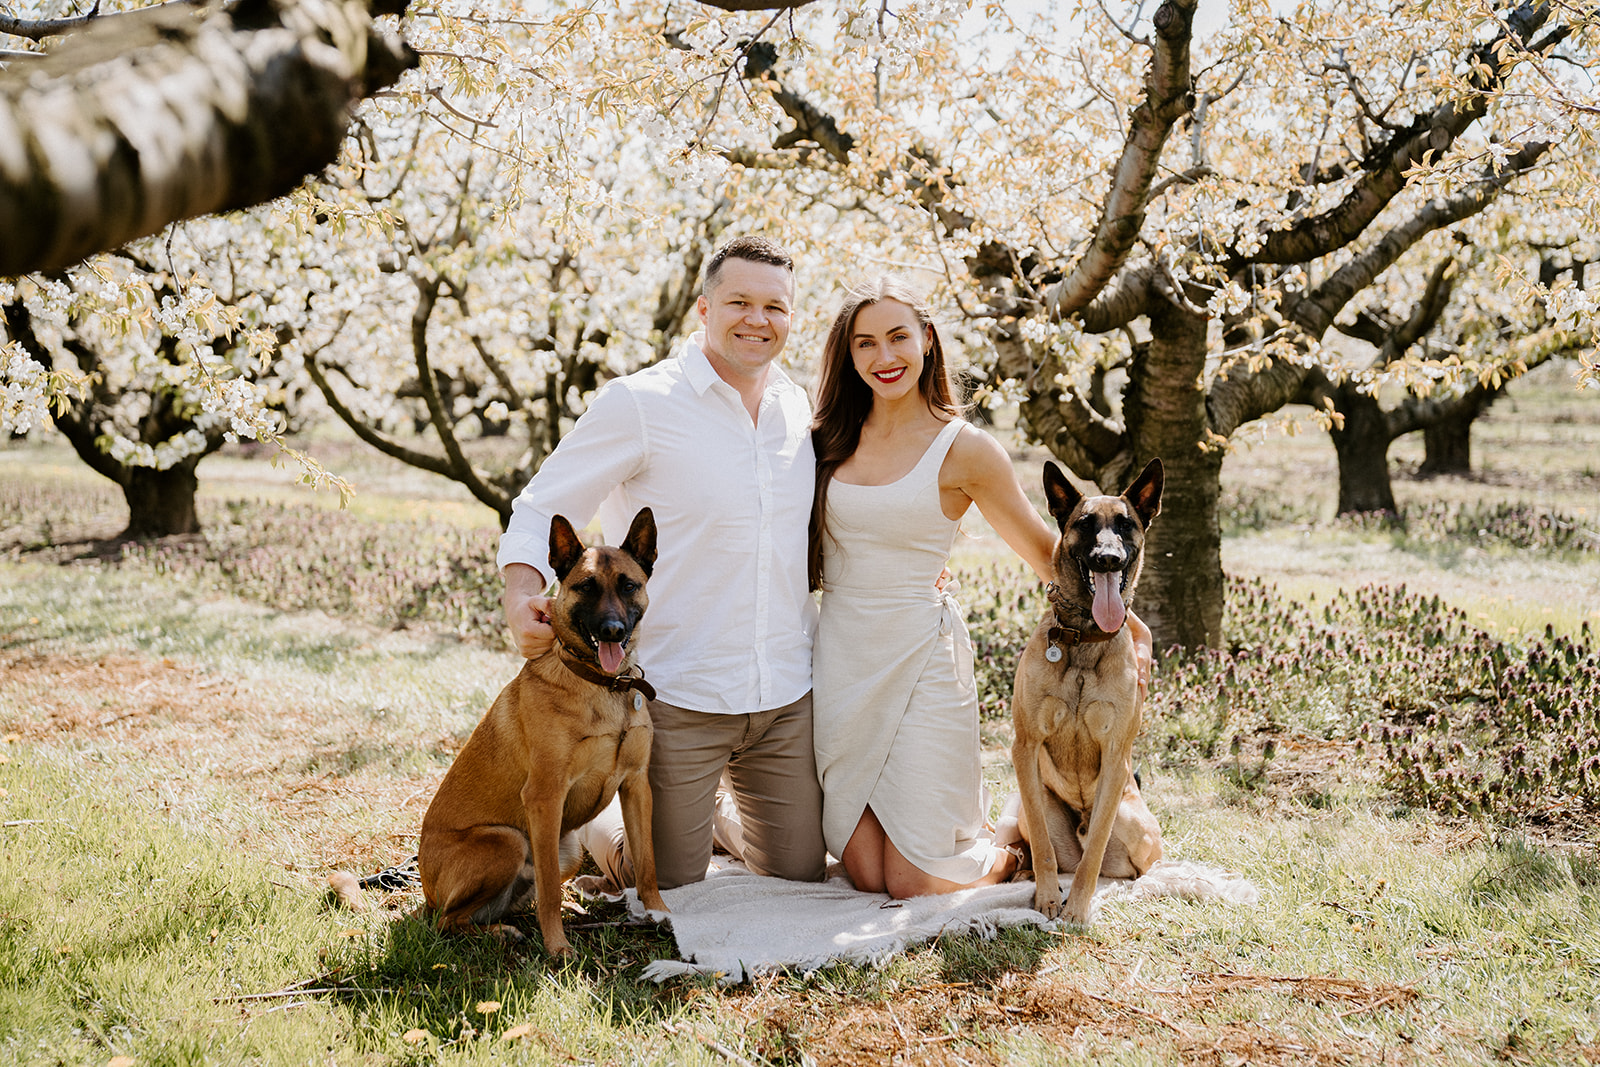 A couple and two dogs kneeling underneath a cherry blossom tree.